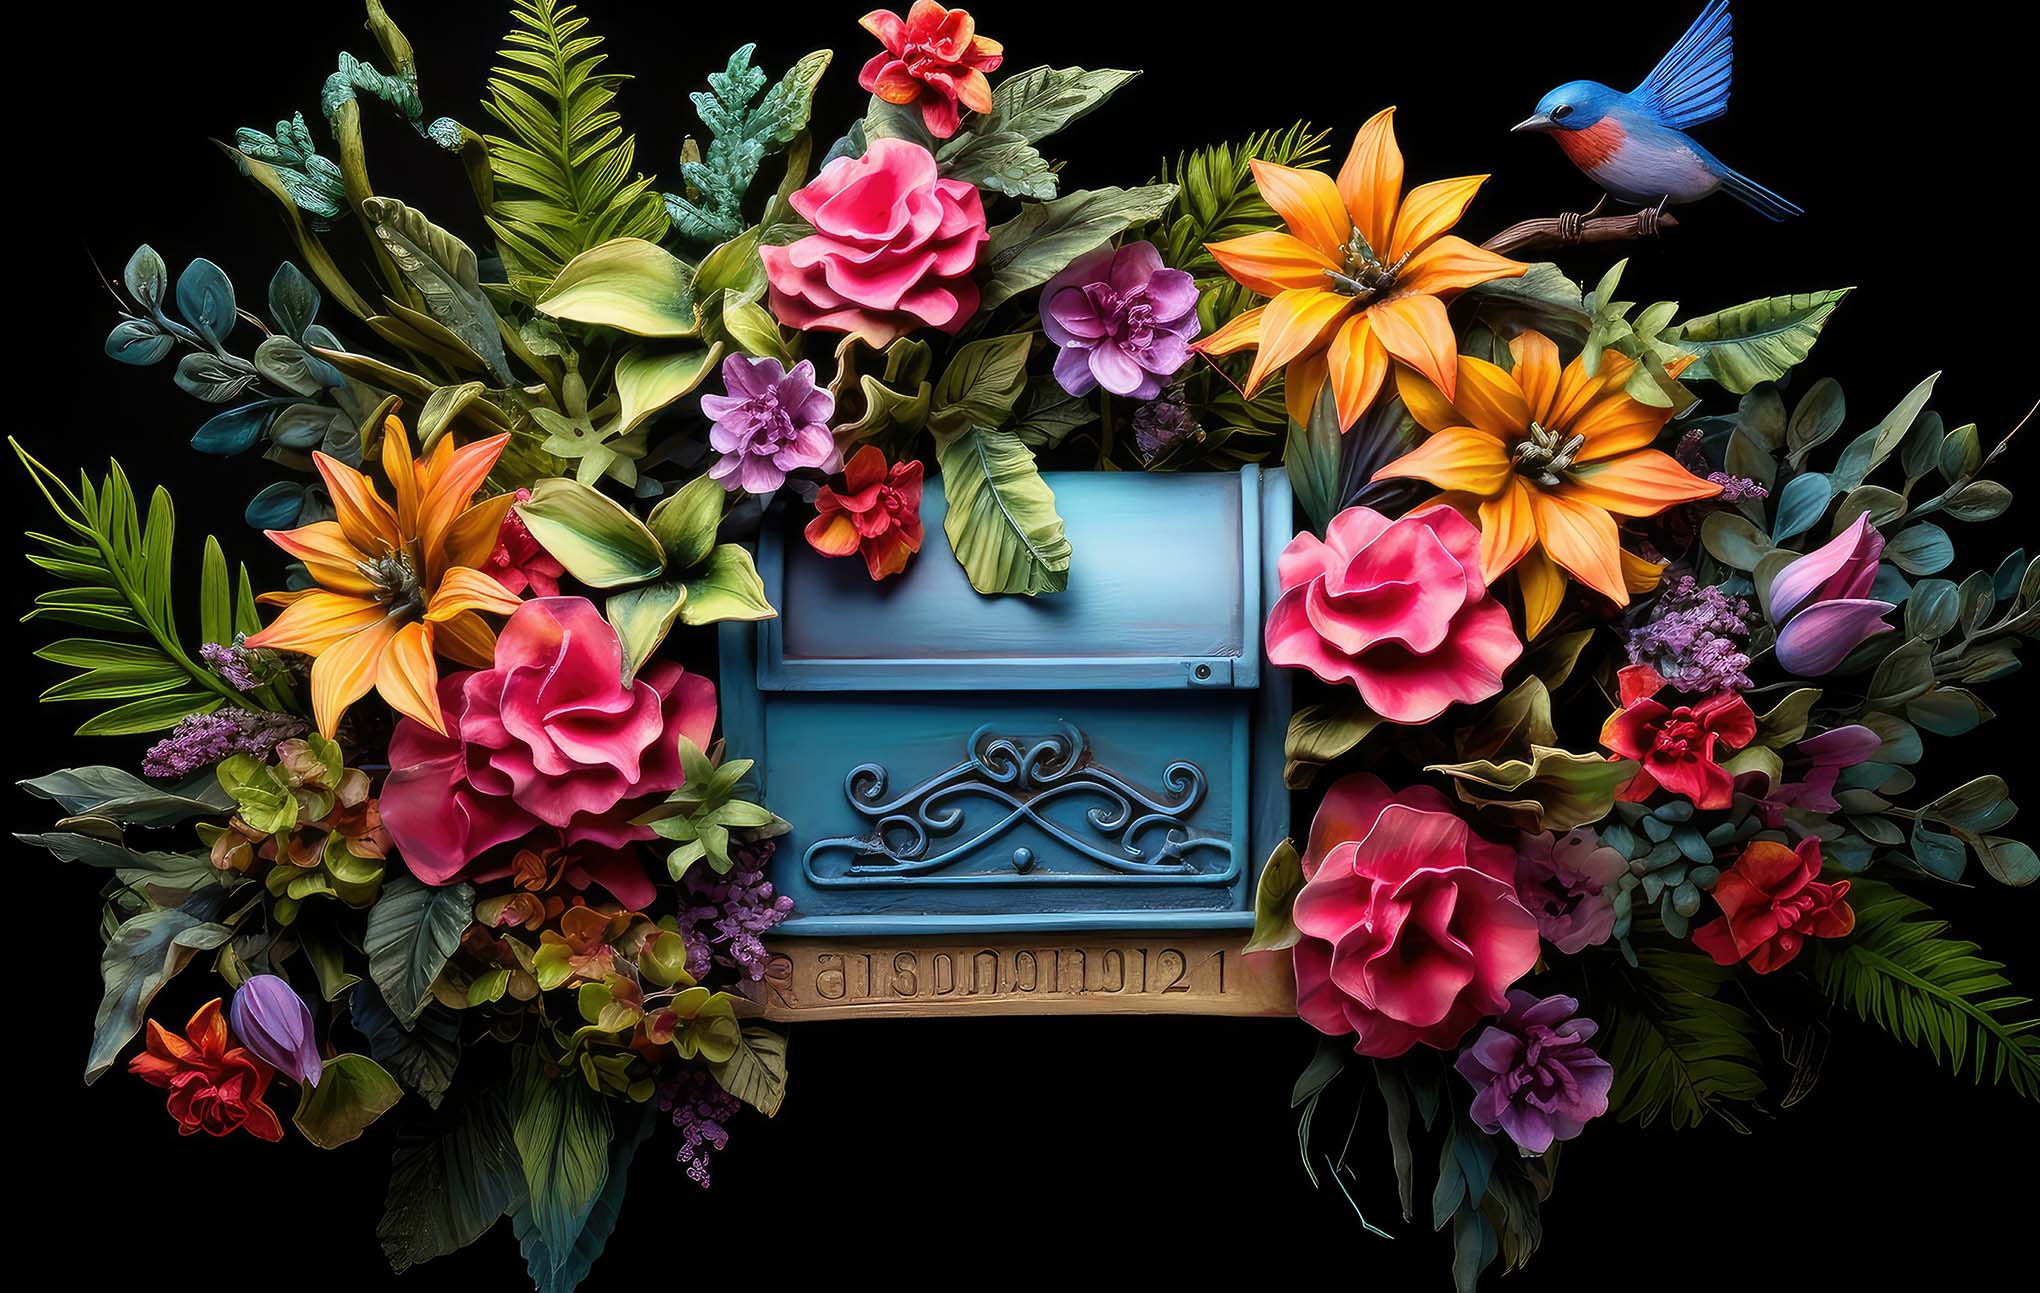 An ornate blue mailbox adorned with a lush assortment of colorful flowers and greenery, with a vibrant bluebird in flight towards the mailbox, set against a black background.